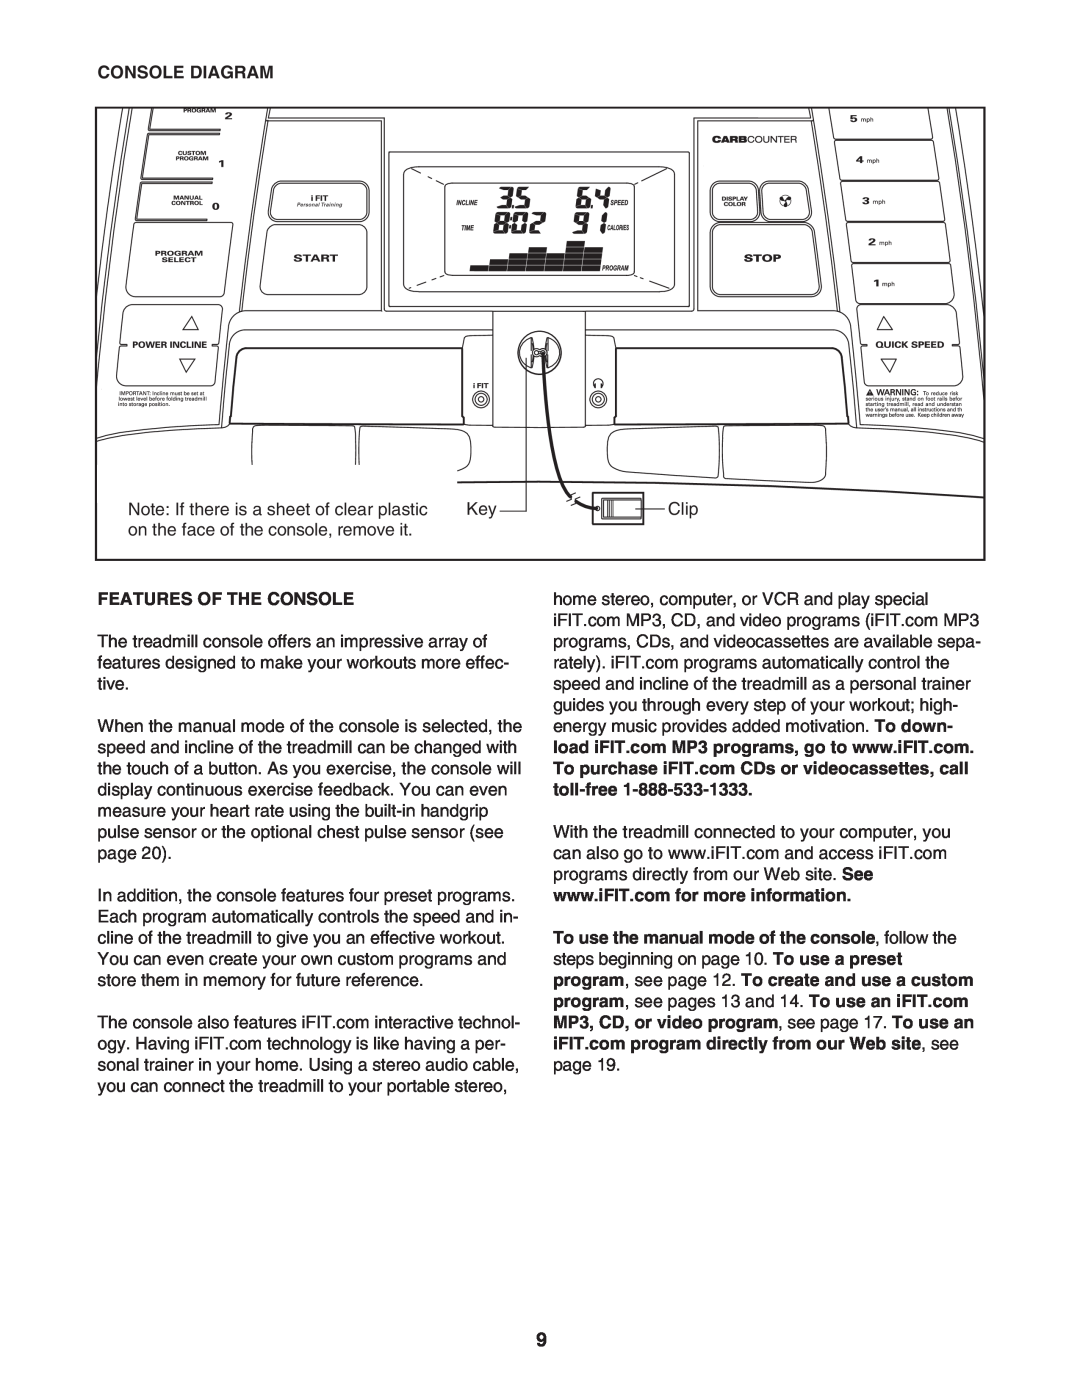 ProForm 831.29675.0 user manual Console Diagram, Features Of The Console 